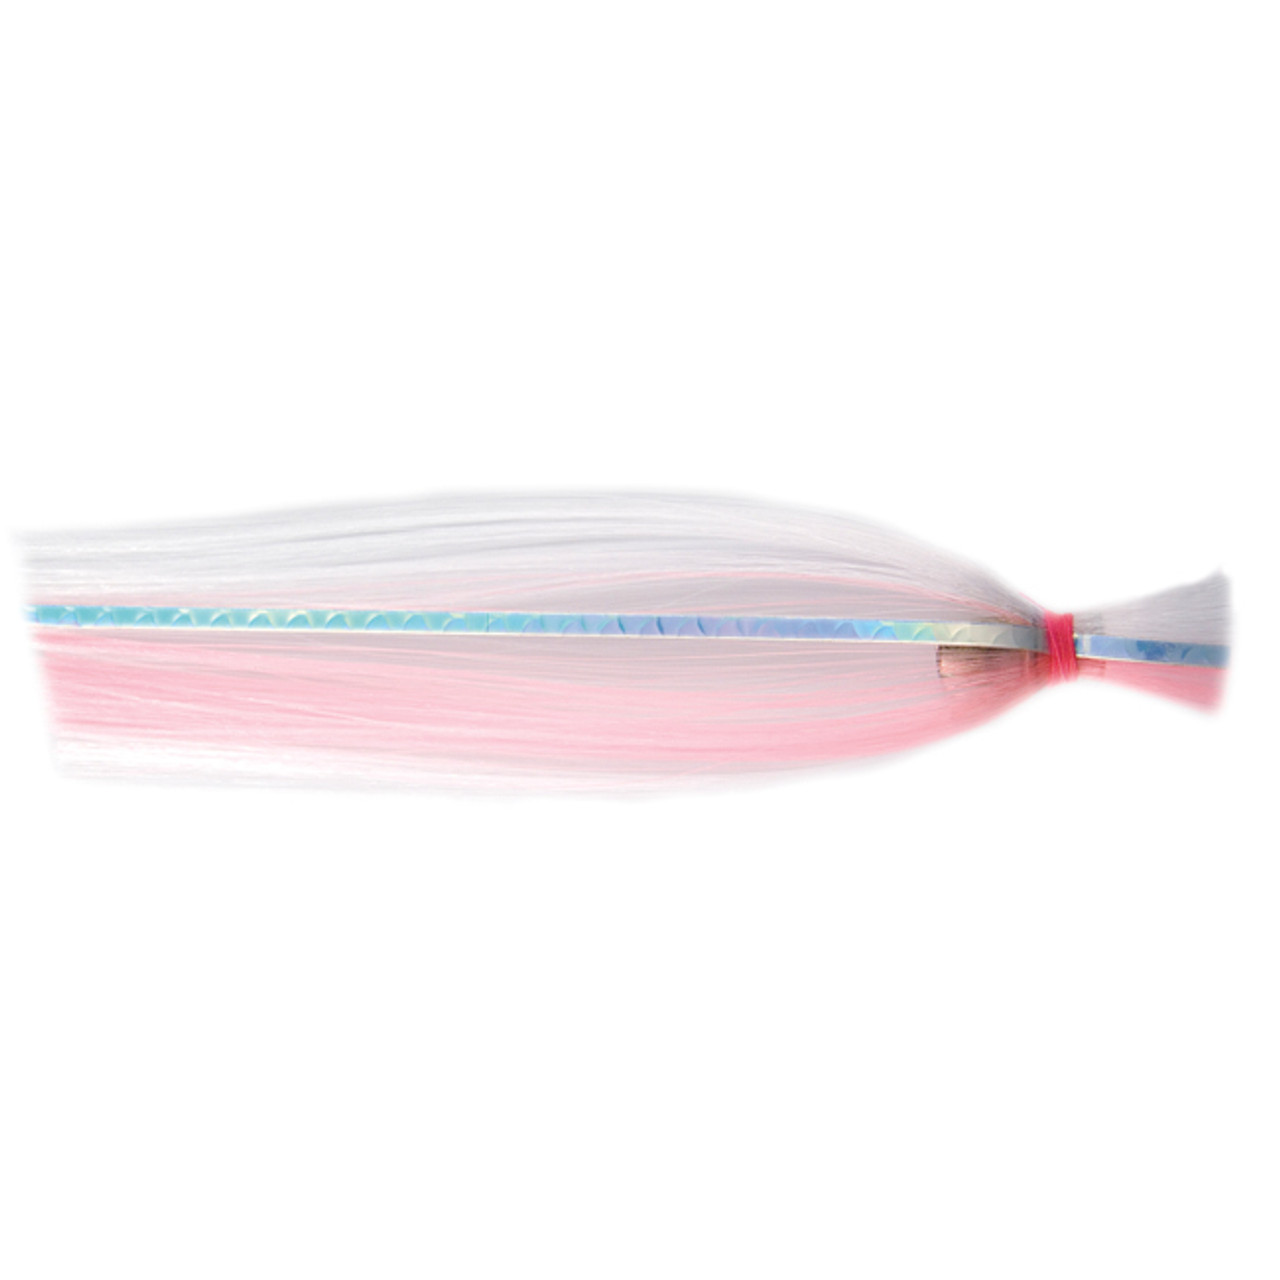 Billy Baits - Billy Witch Lure - FISH307.com